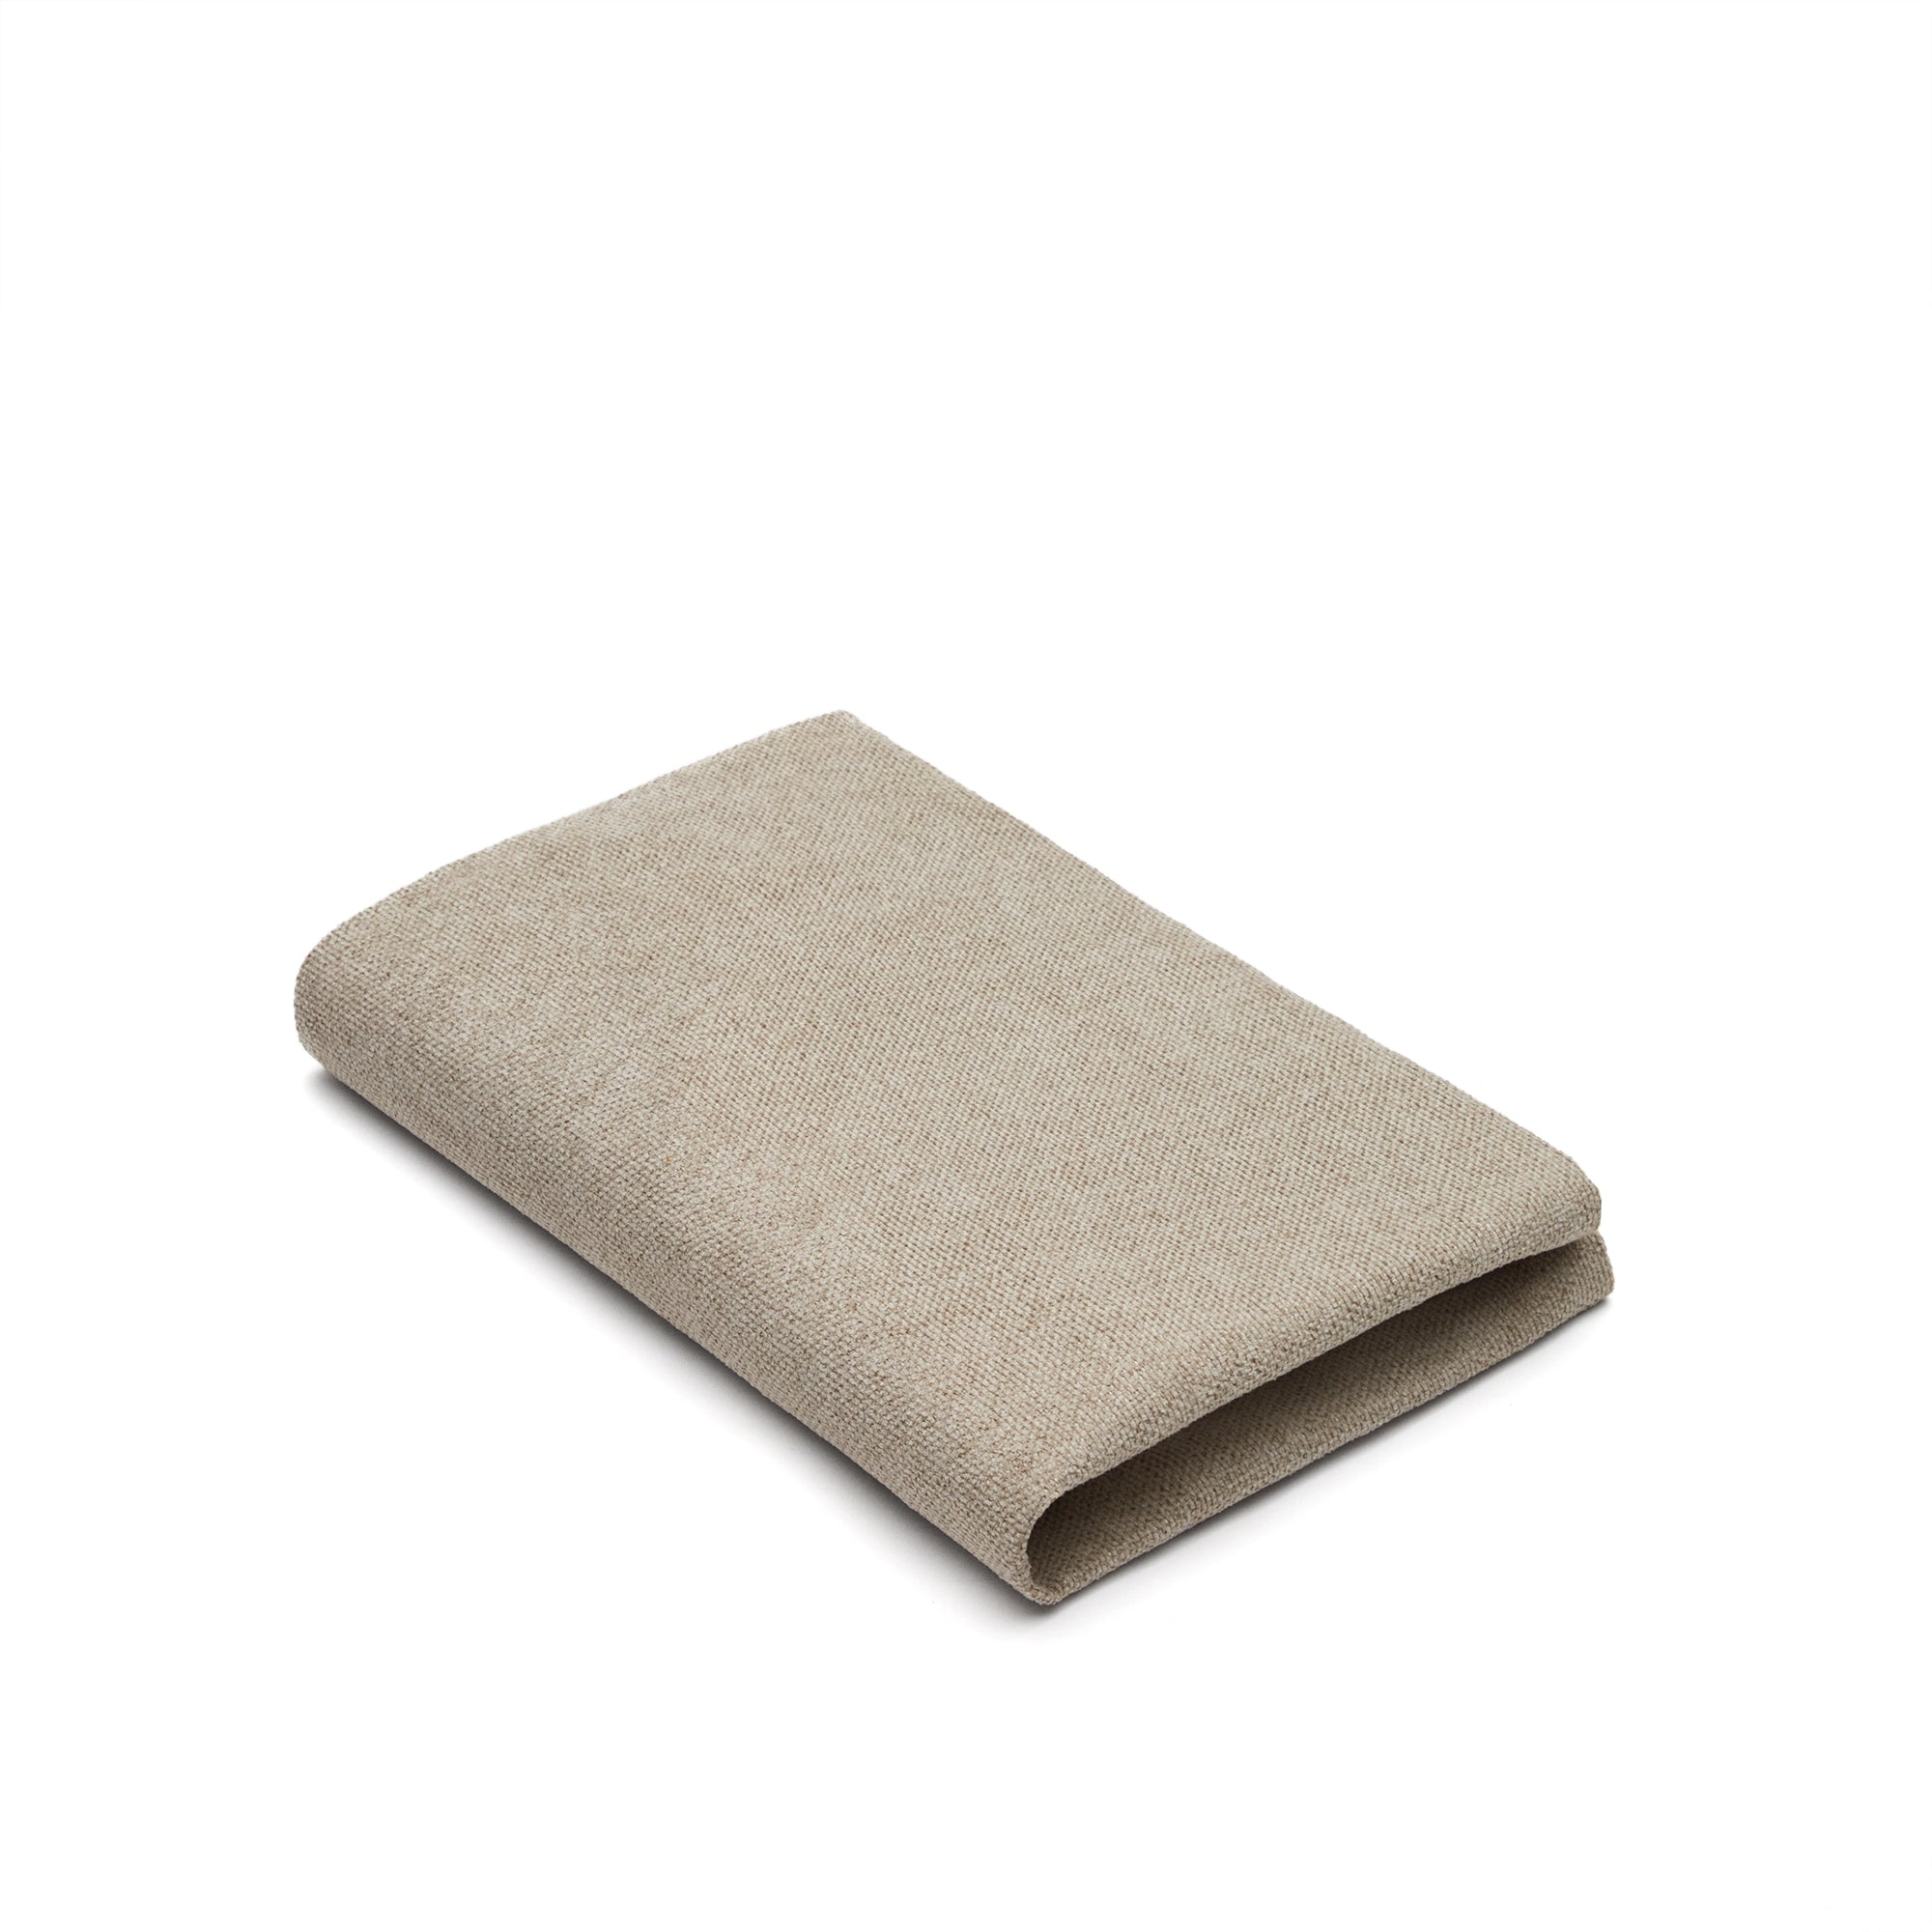 Bowie cover for small bed for pets in beige, 63 x 80 cm